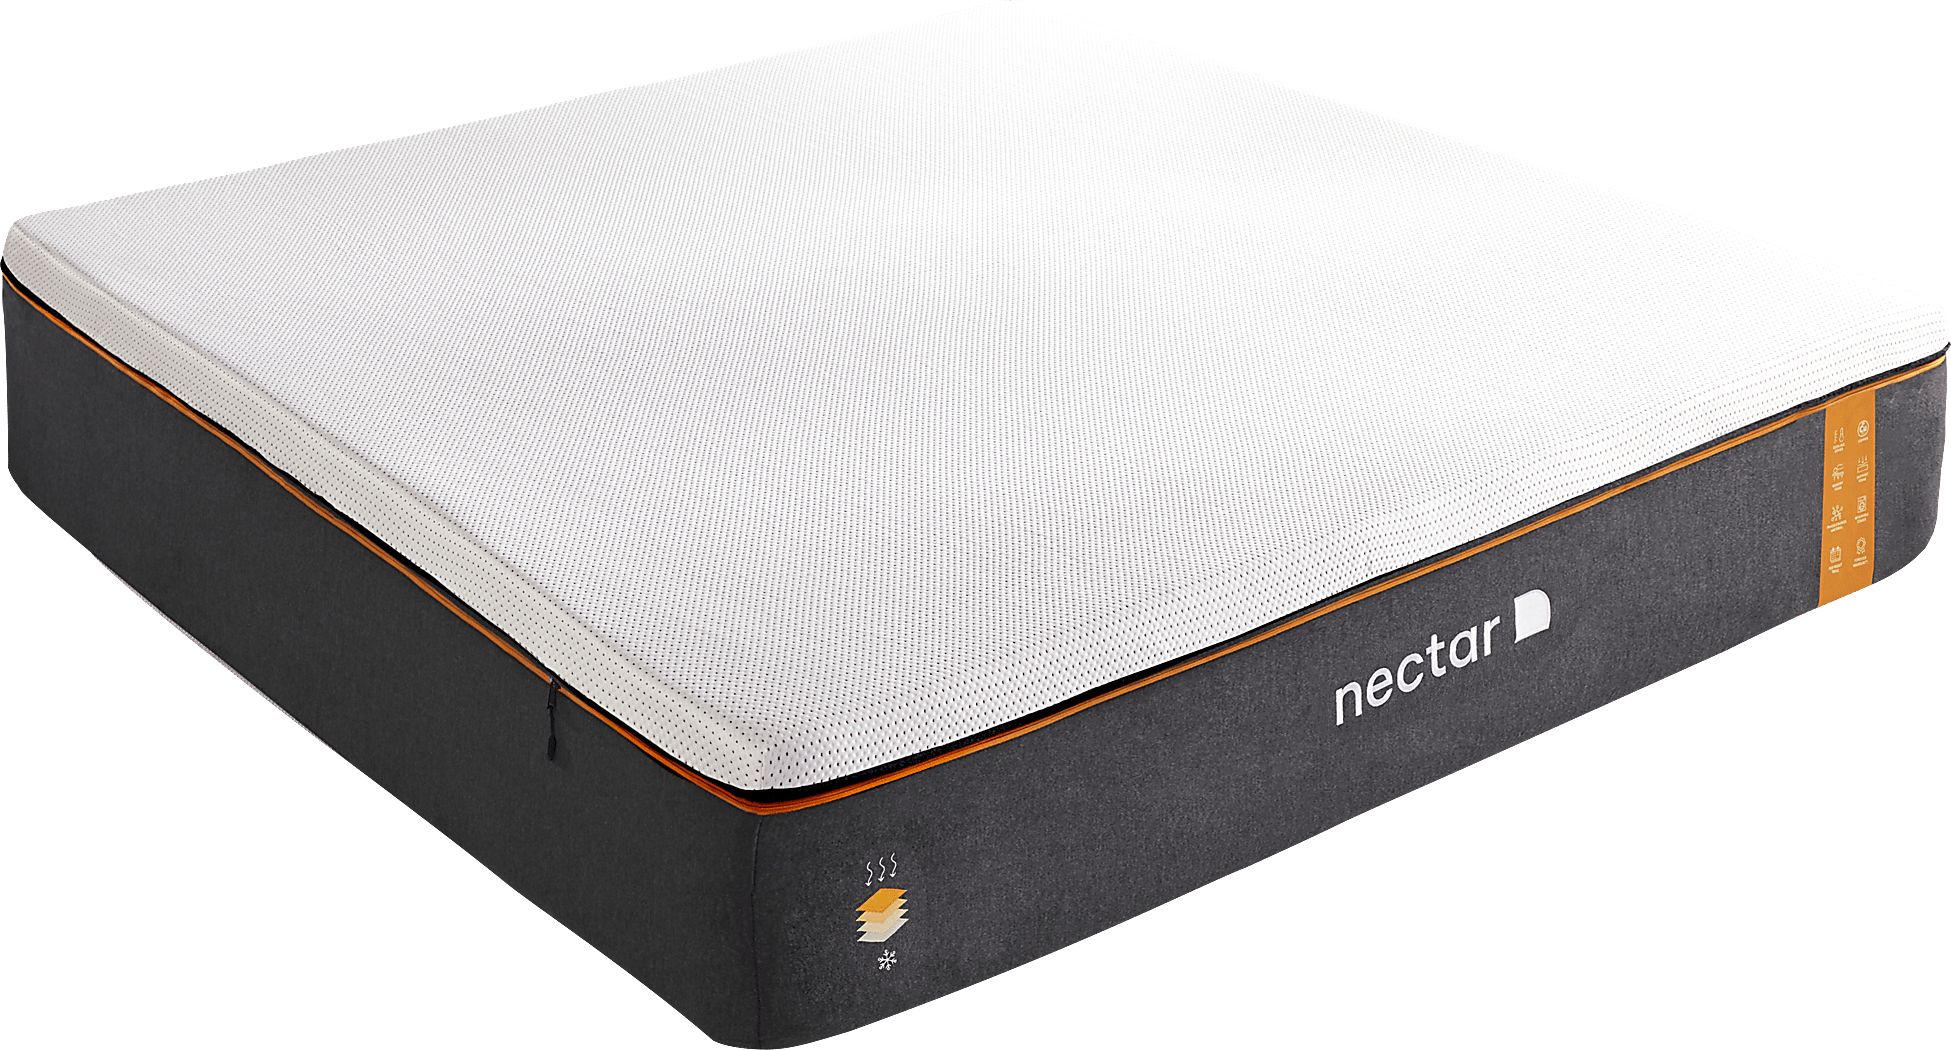 nectar king size mattress branded product